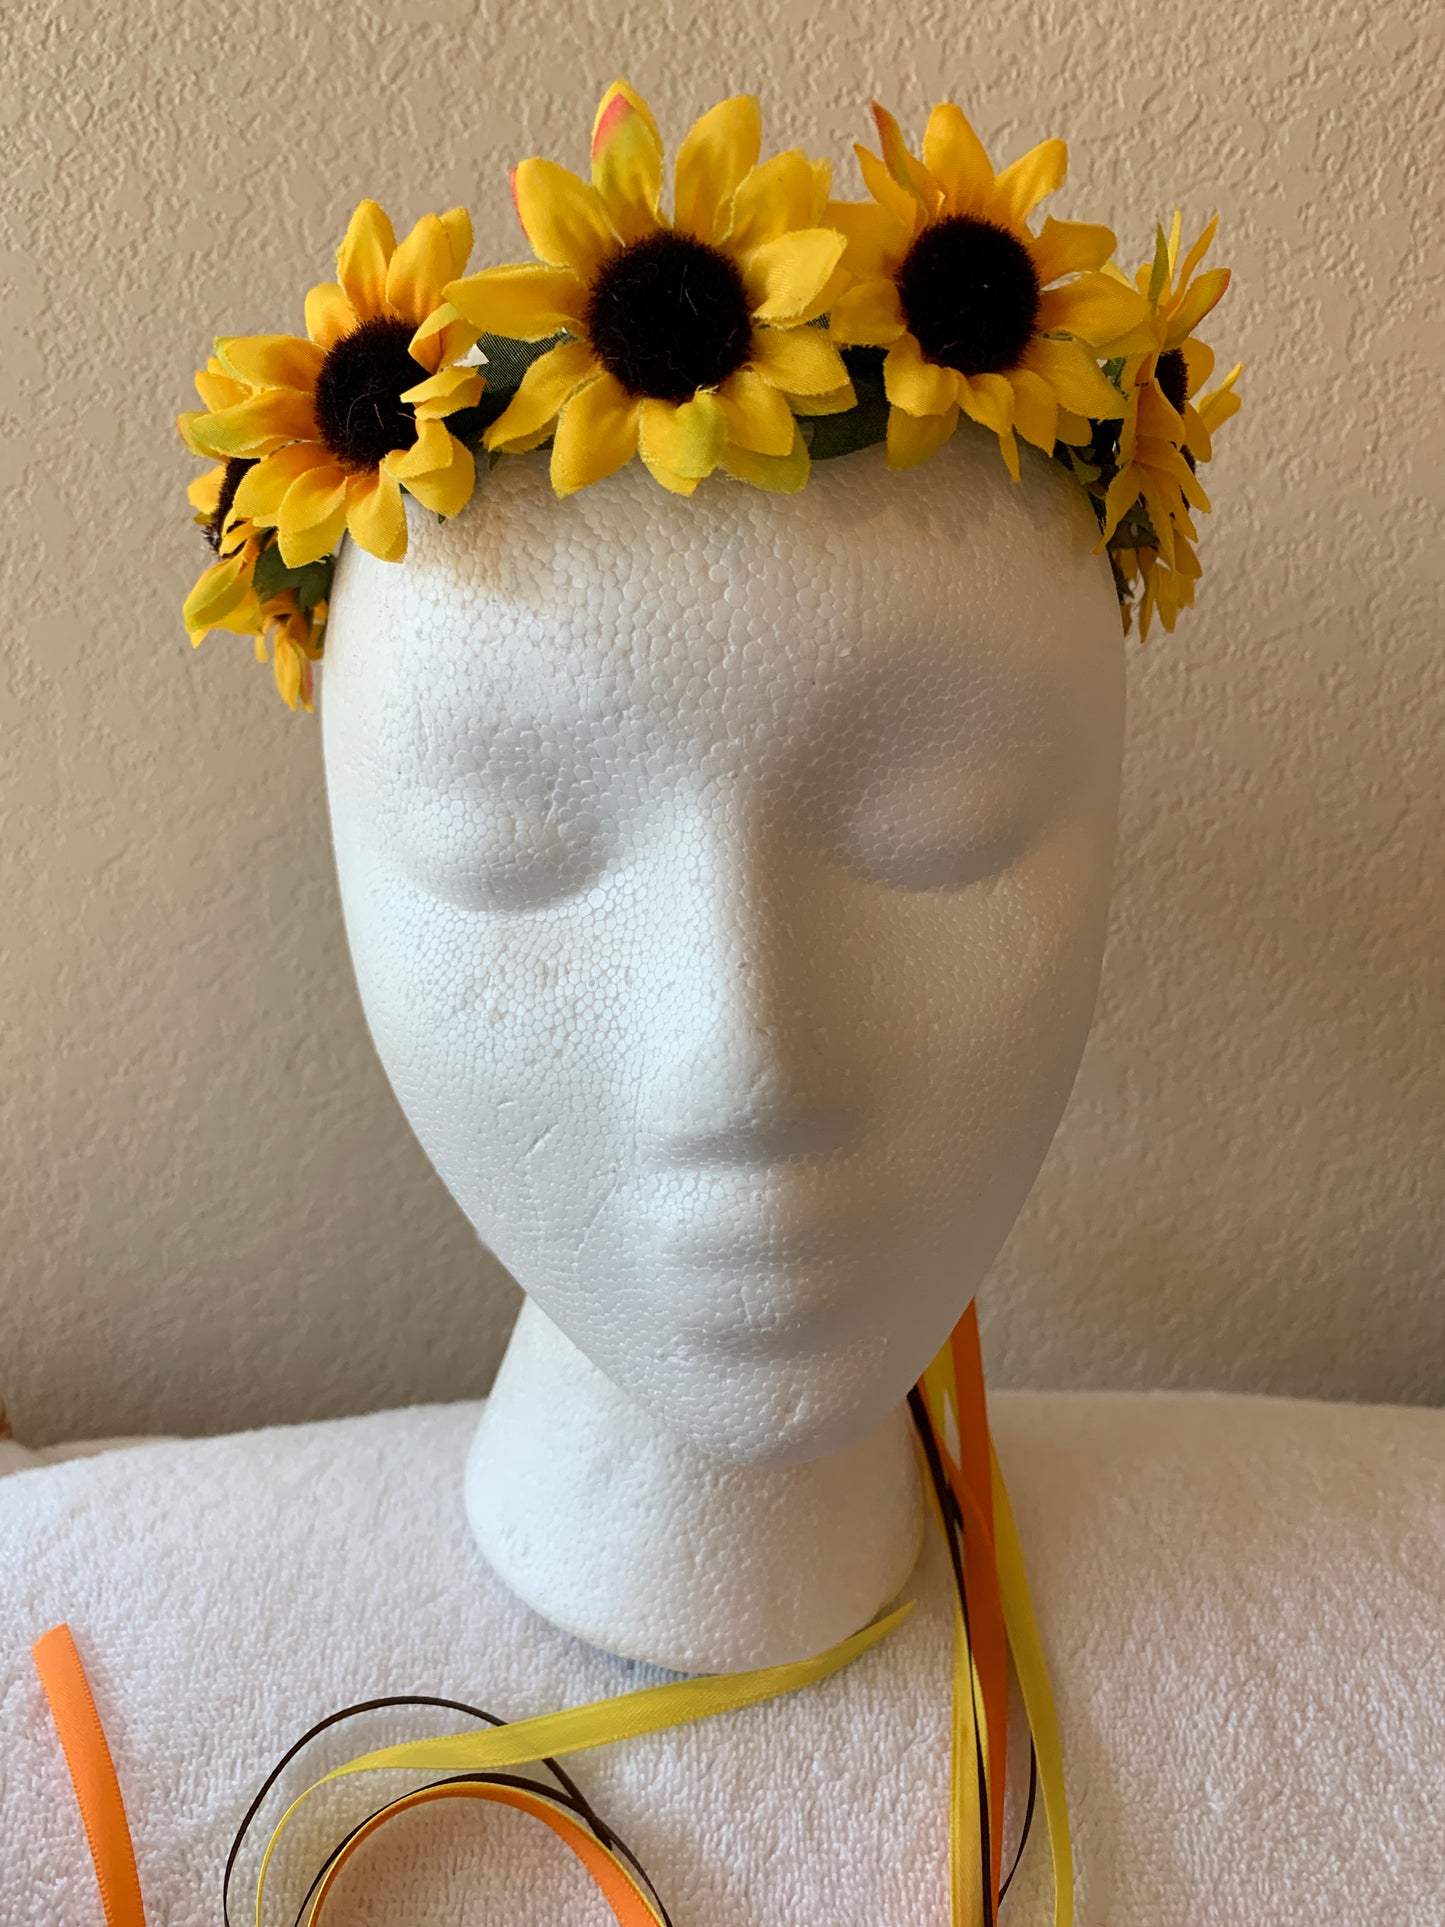 Small Wreath - All Bright Yellow Sunflowers